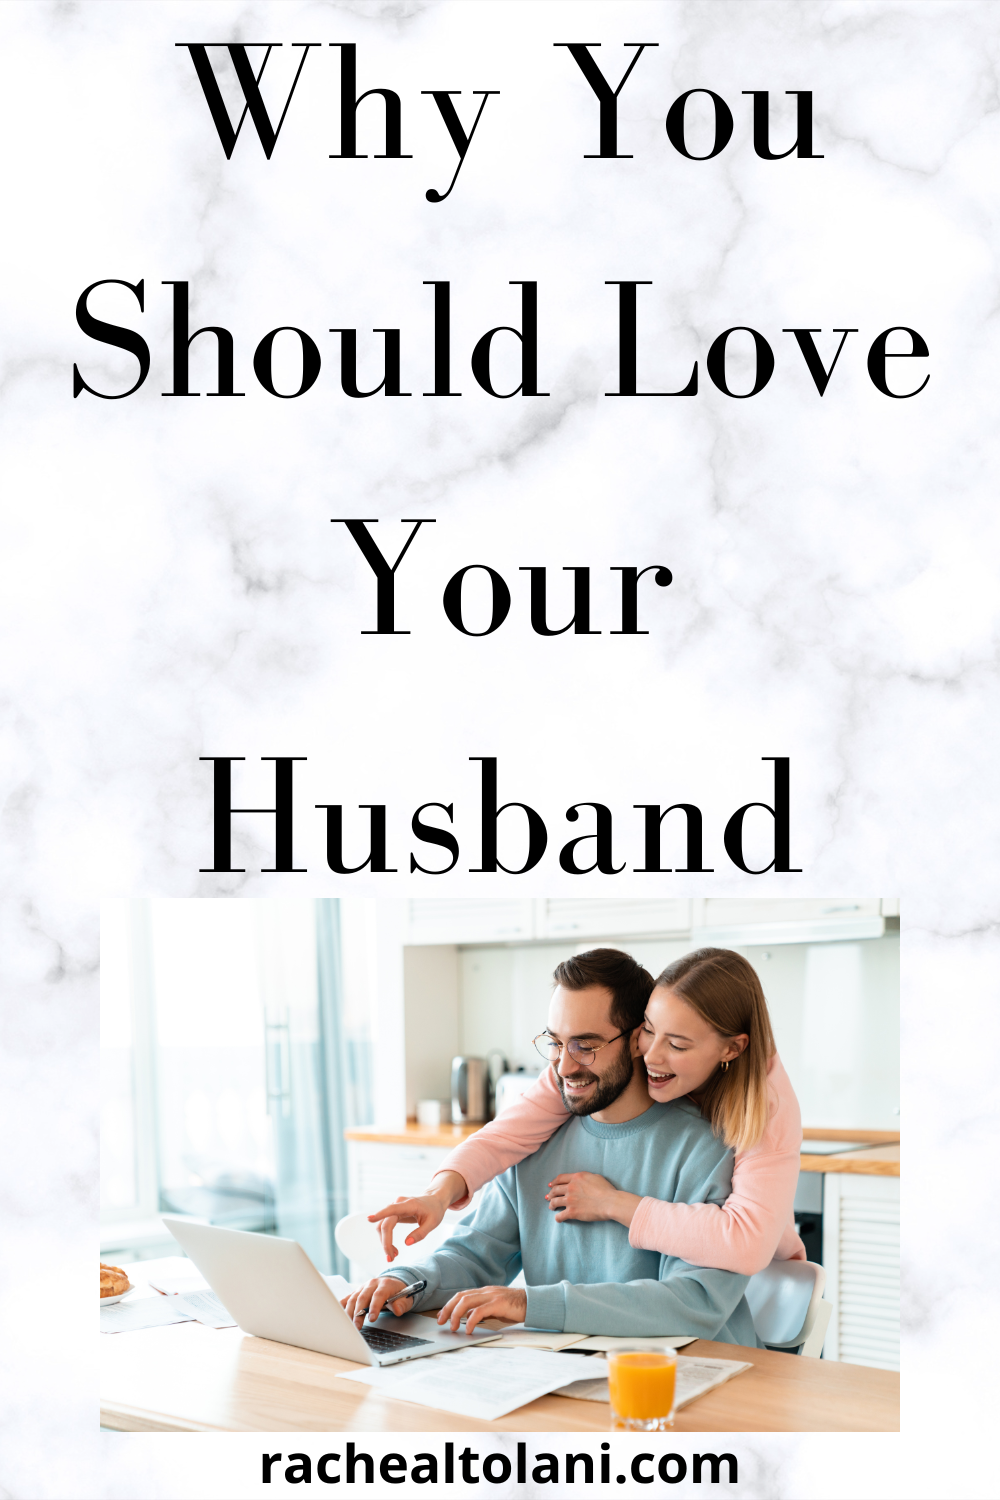 Why you should love your husband